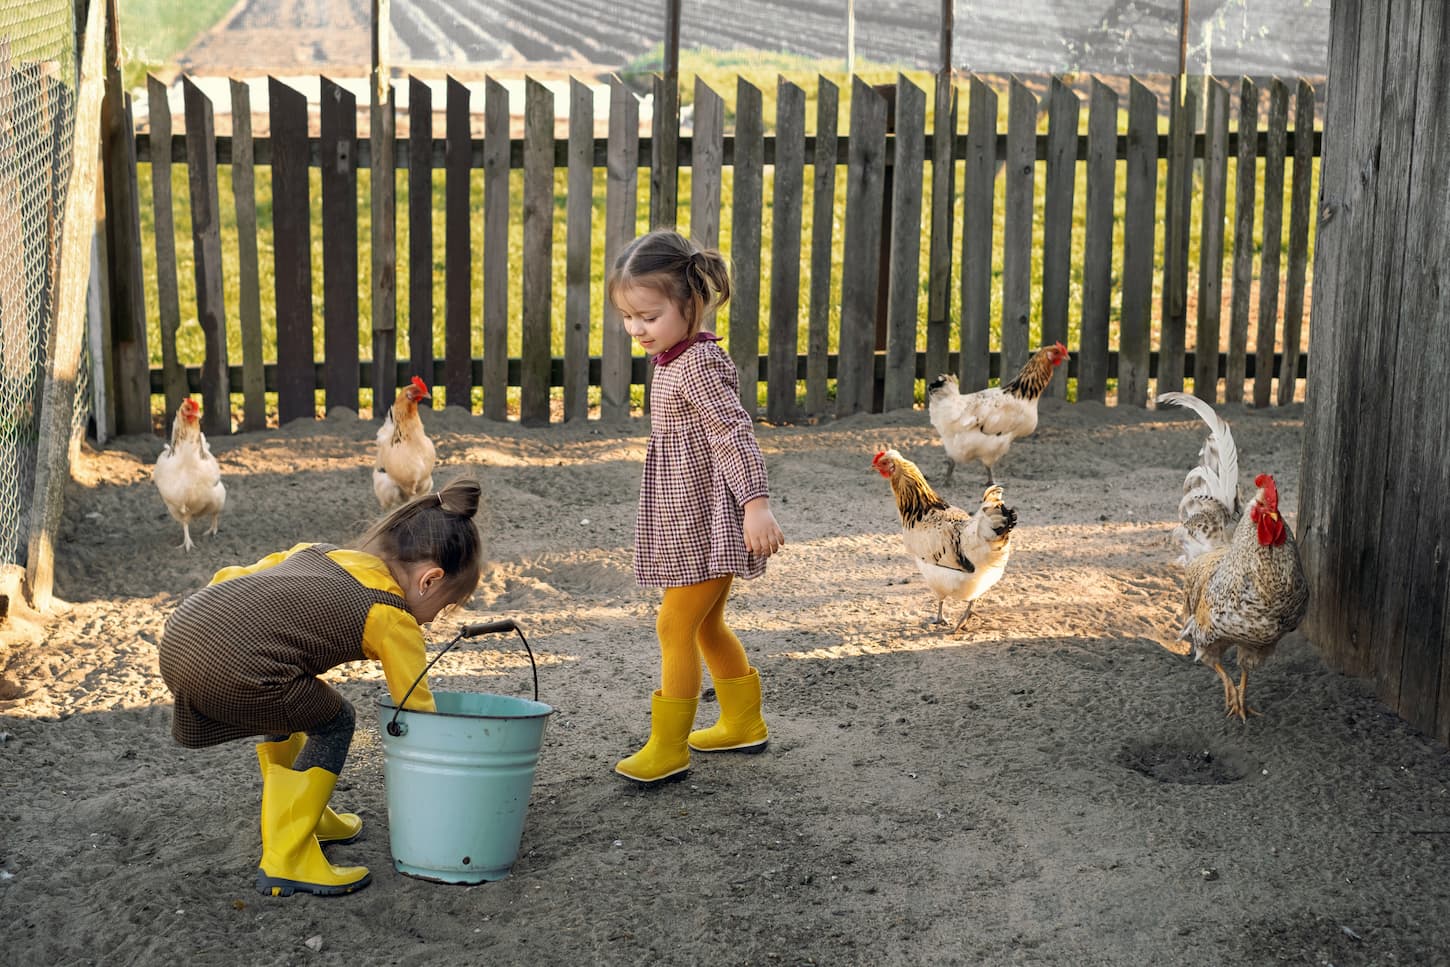 An image of two children feeding chickens in the village in the backyard.